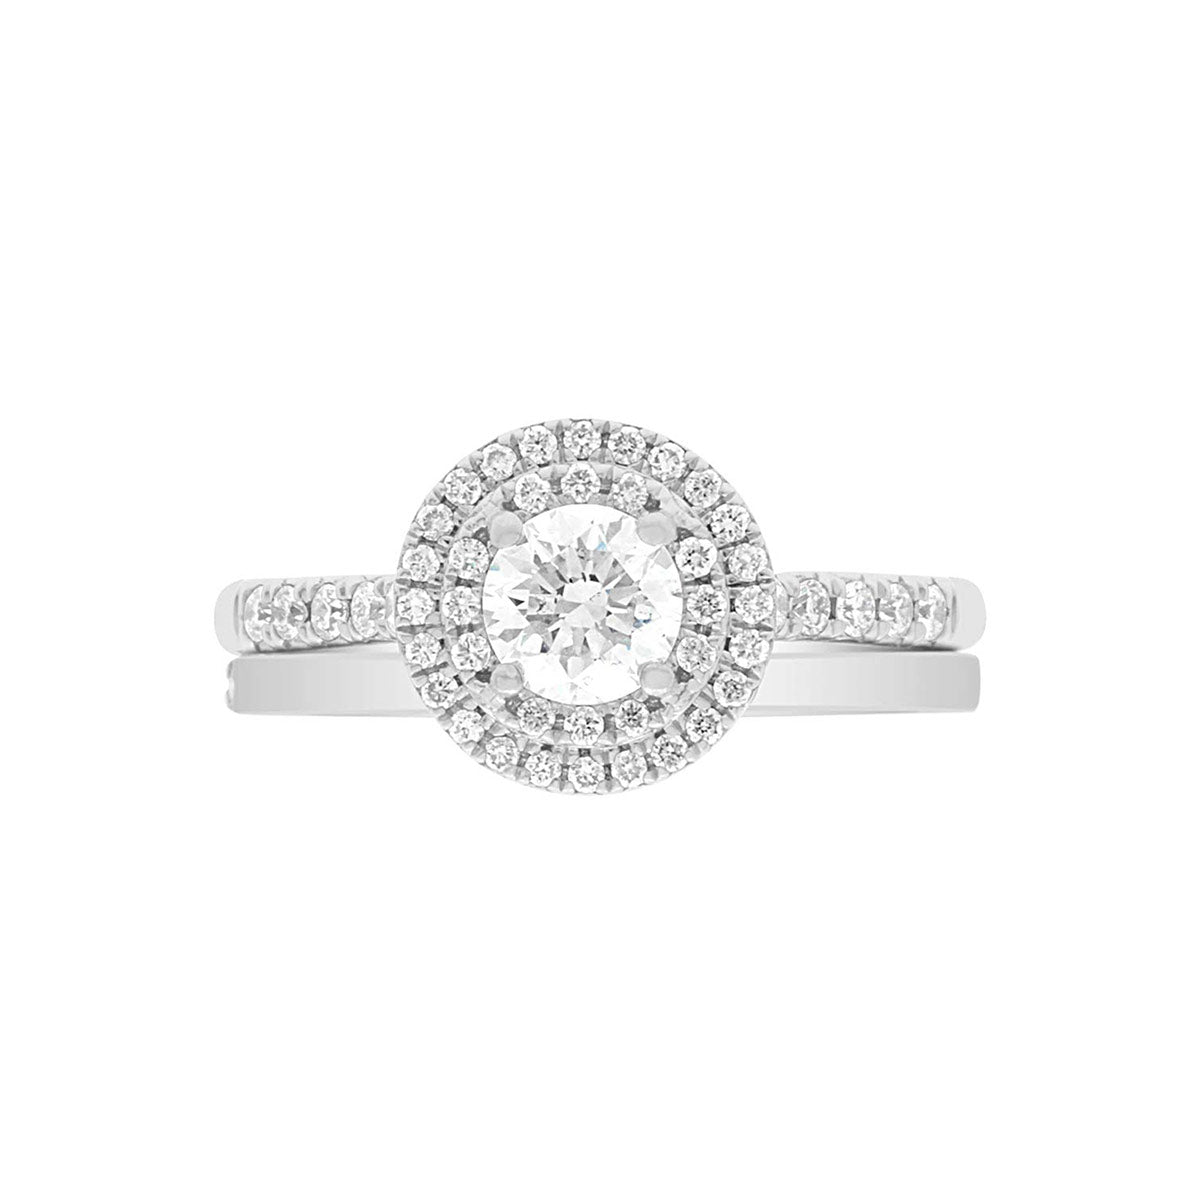 Round Double Halo Engagement Ring laying flat with a matching plain wedding ring